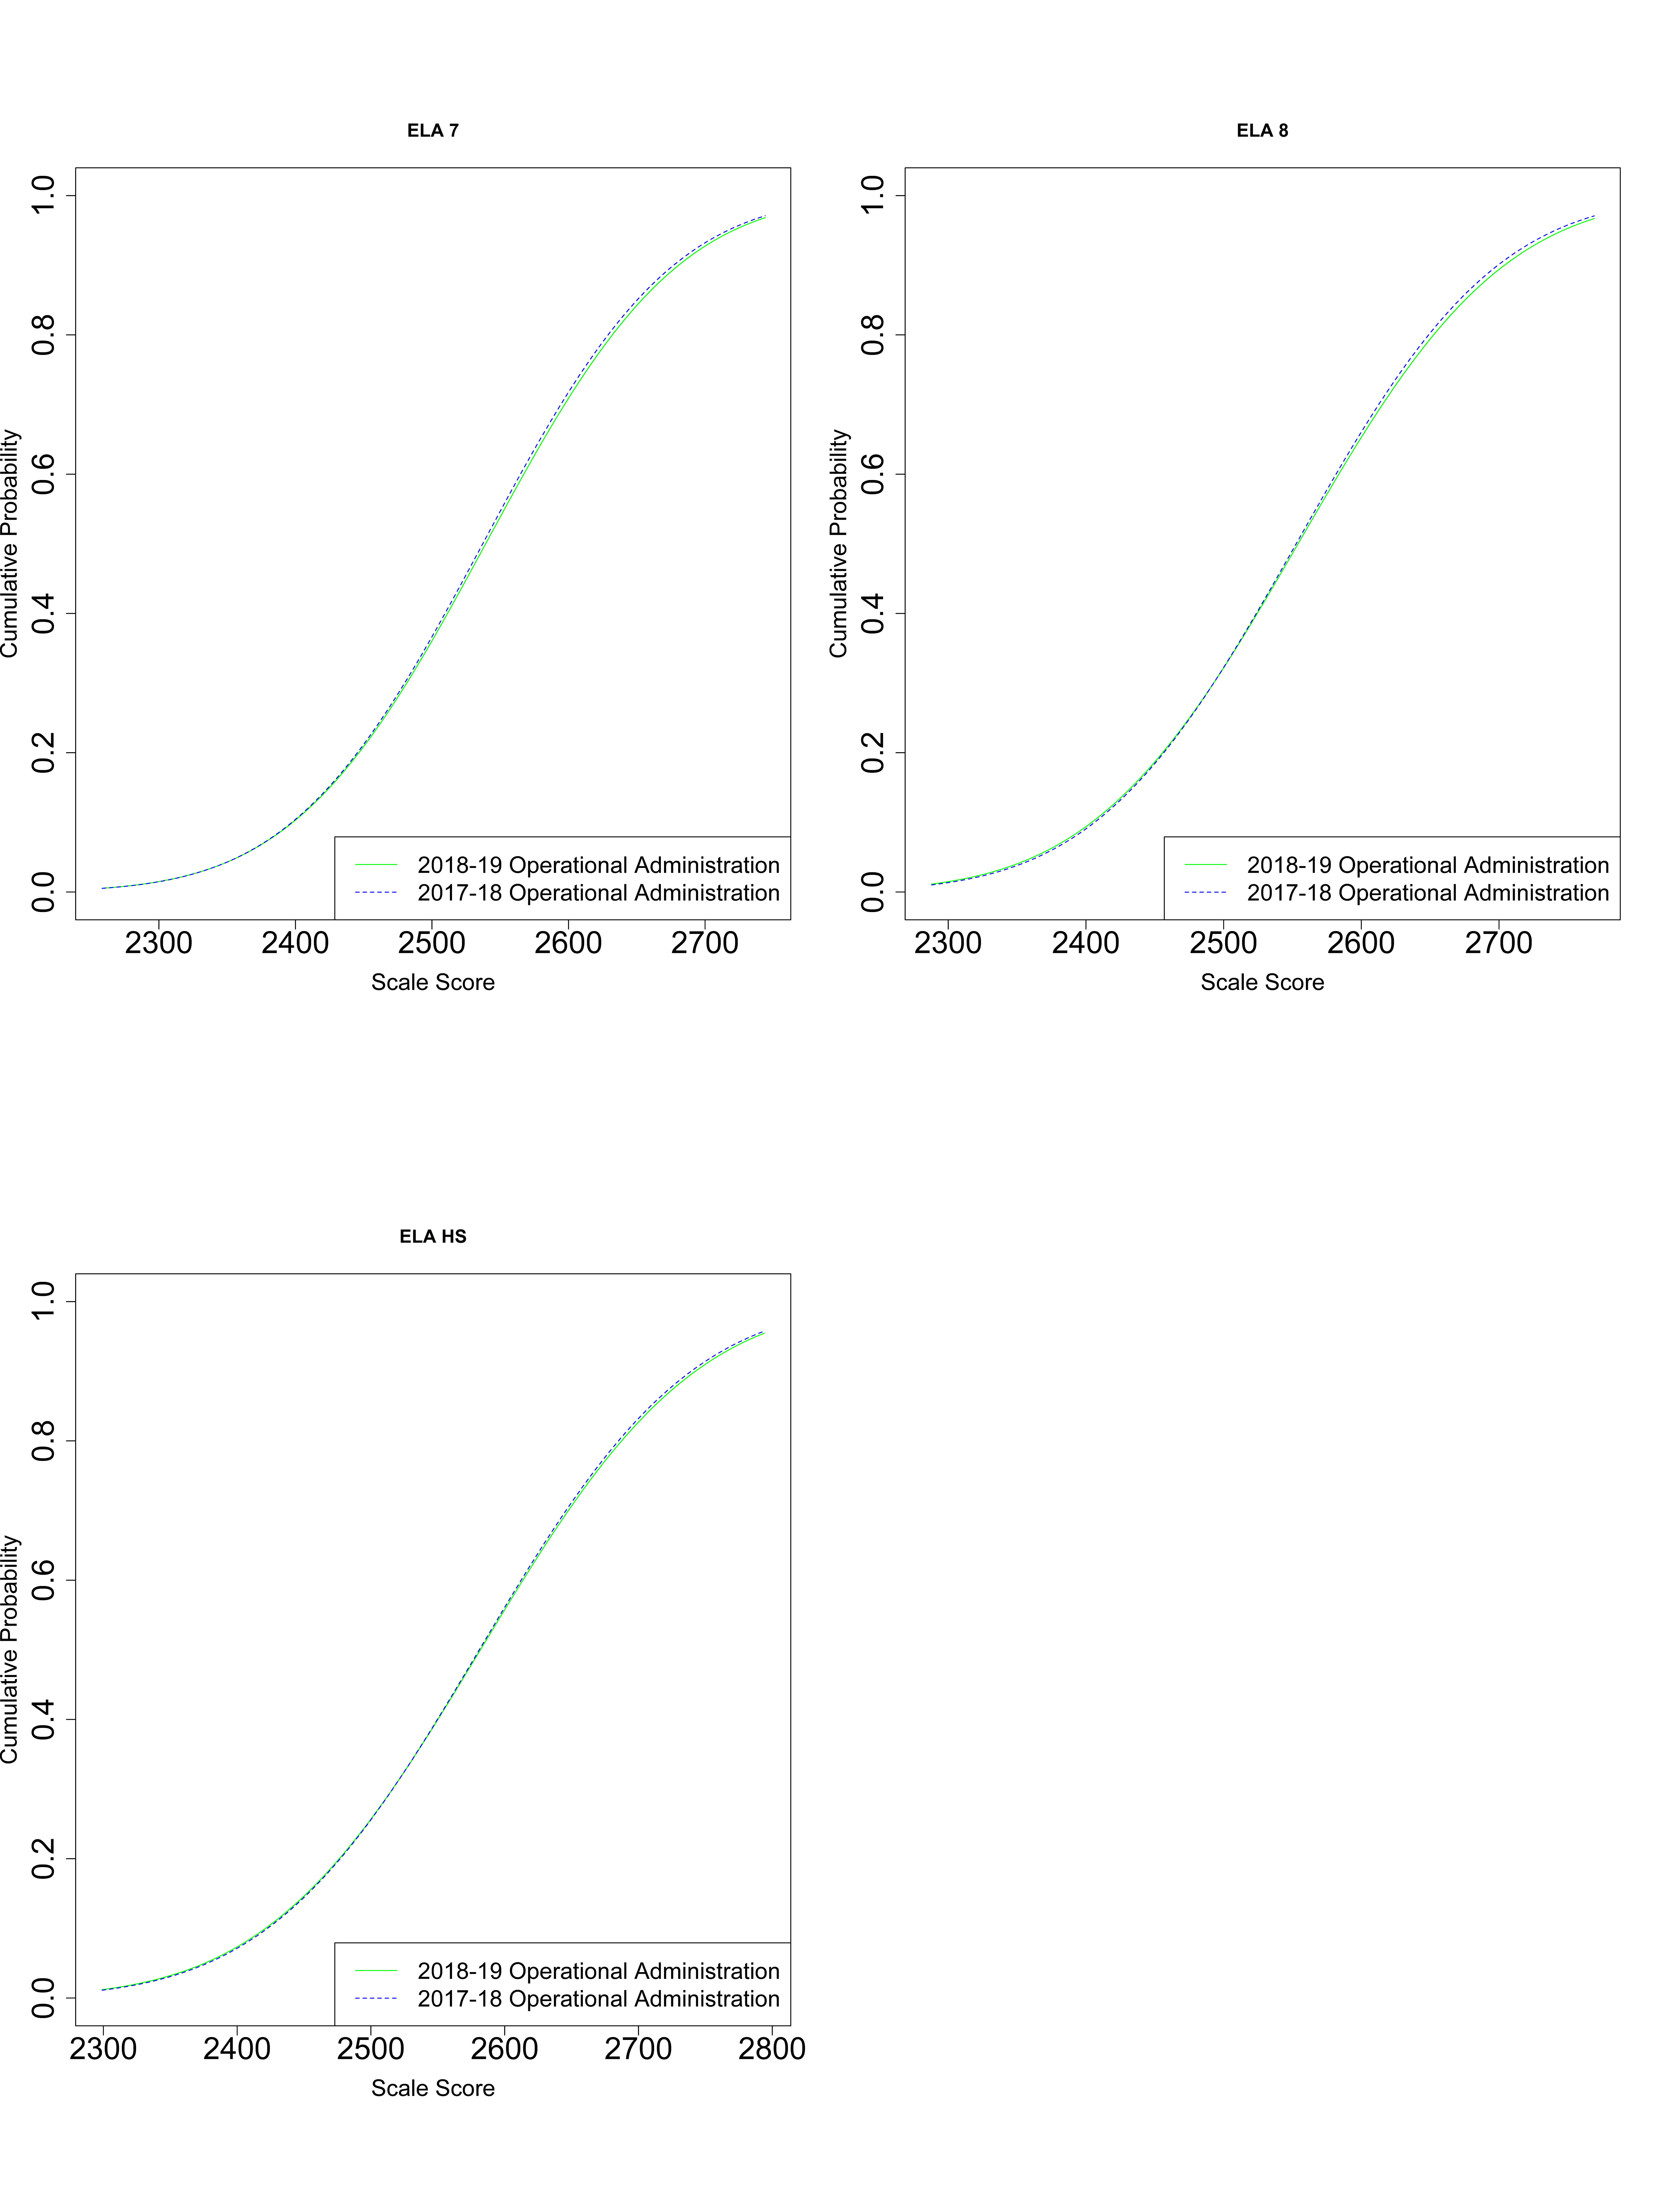 Test Characteristic Curves for Linked Tests (ELA/Literacy, Grades 7, 8, and High School)